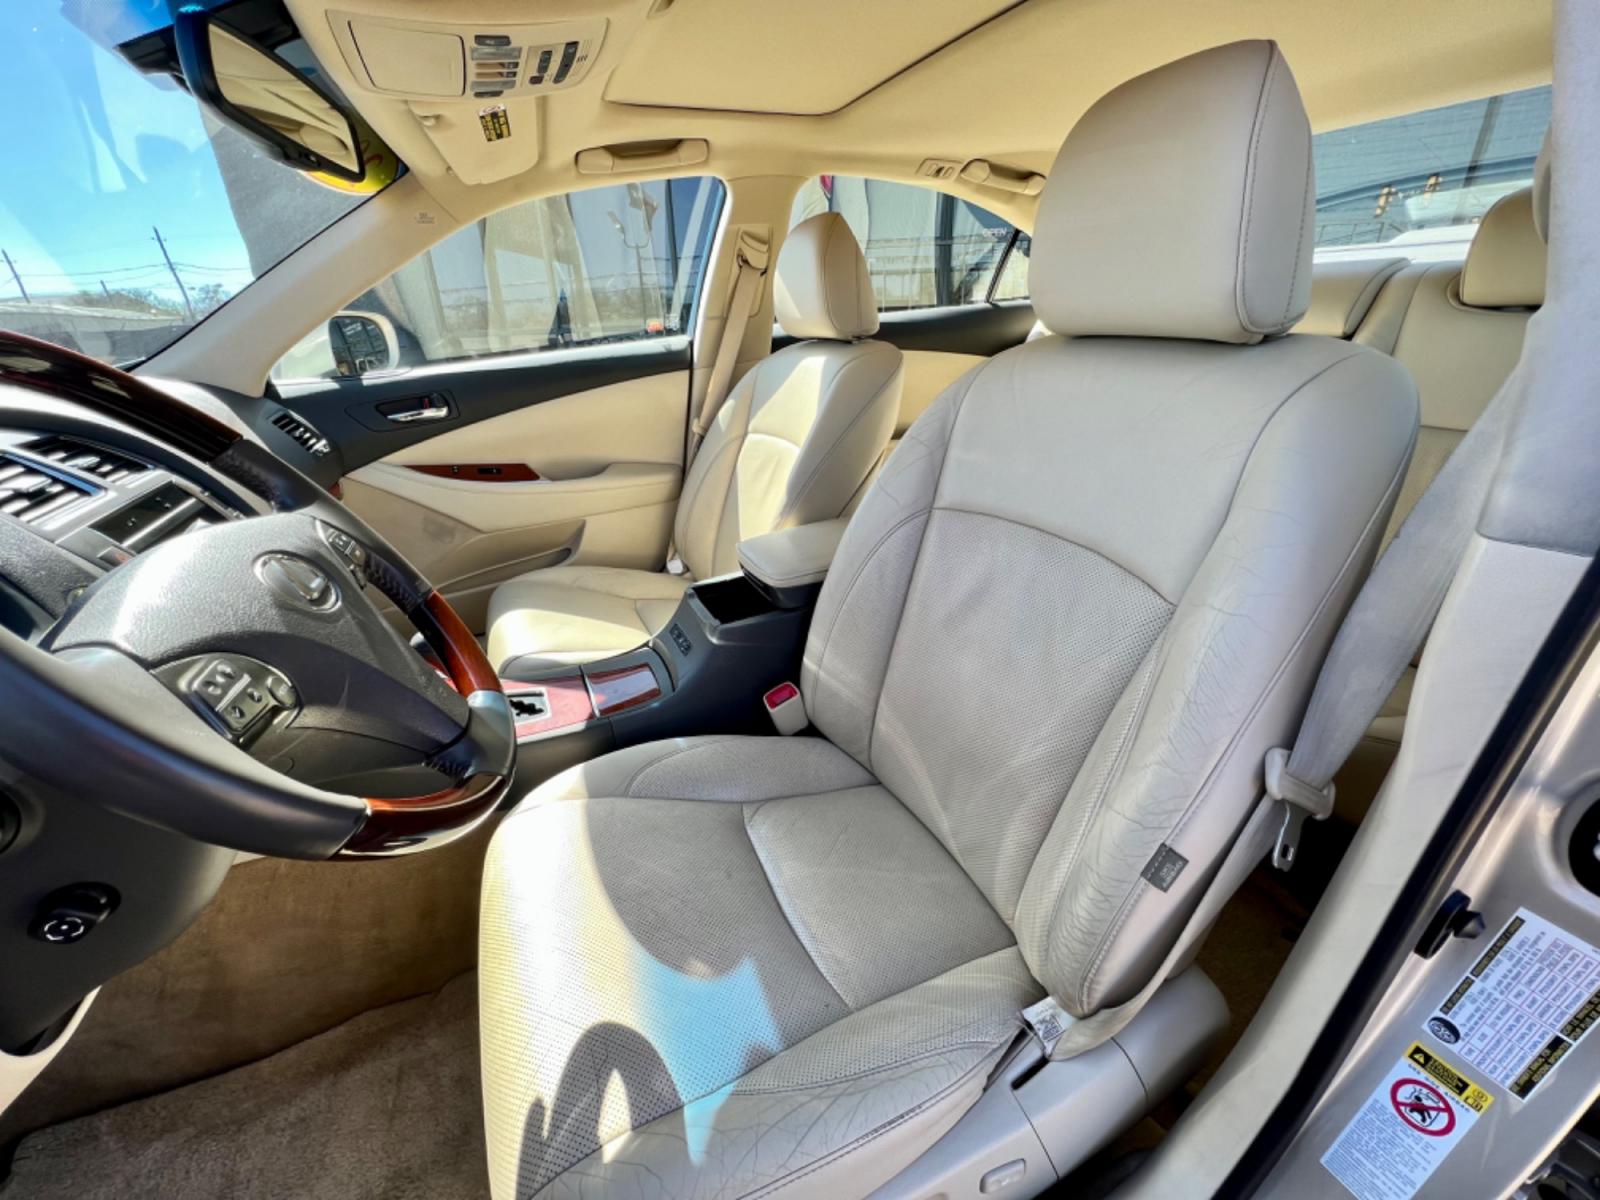 2011 GOLD LEXUS ES 350 (JTHBK1EG9B2) , located at 5900 E. Lancaster Ave., Fort Worth, TX, 76112, (817) 457-5456, 0.000000, 0.000000 - This is a 2011 LEXUS ES 350 4 DOOR SEDAN that is in excellent condition. There are no dents or scratches. The interior is clean with no rips or tears or stains. All power windows, door locks and seats. Ice cold AC for those hot Texas summer days. It is equipped with a CD player, AM/FM radio, AUX por - Photo #10